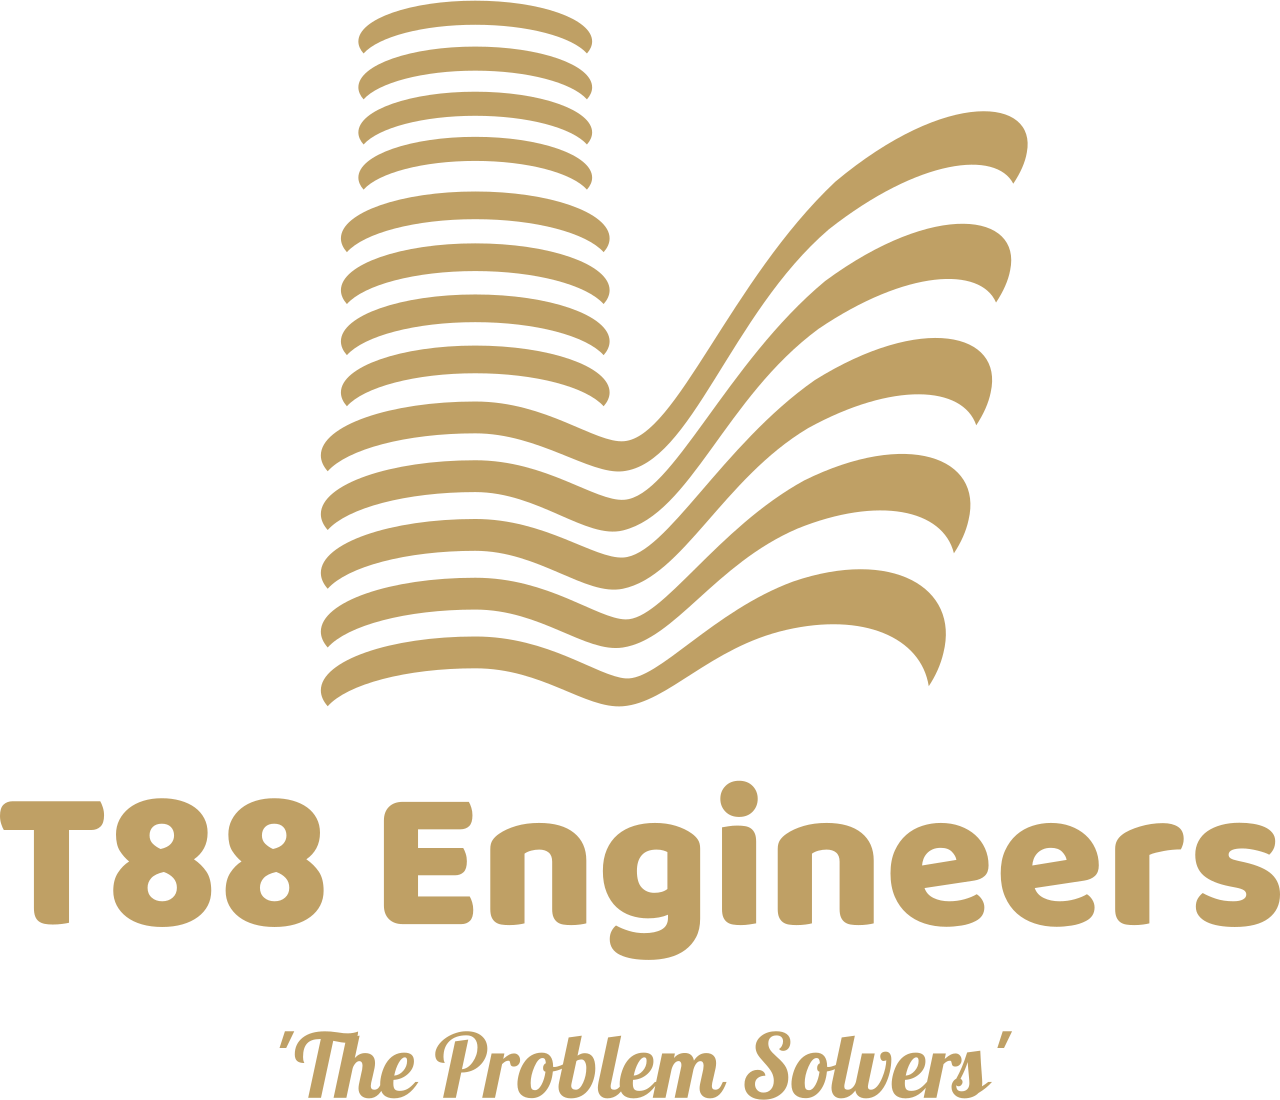 T88 Engineers's web page